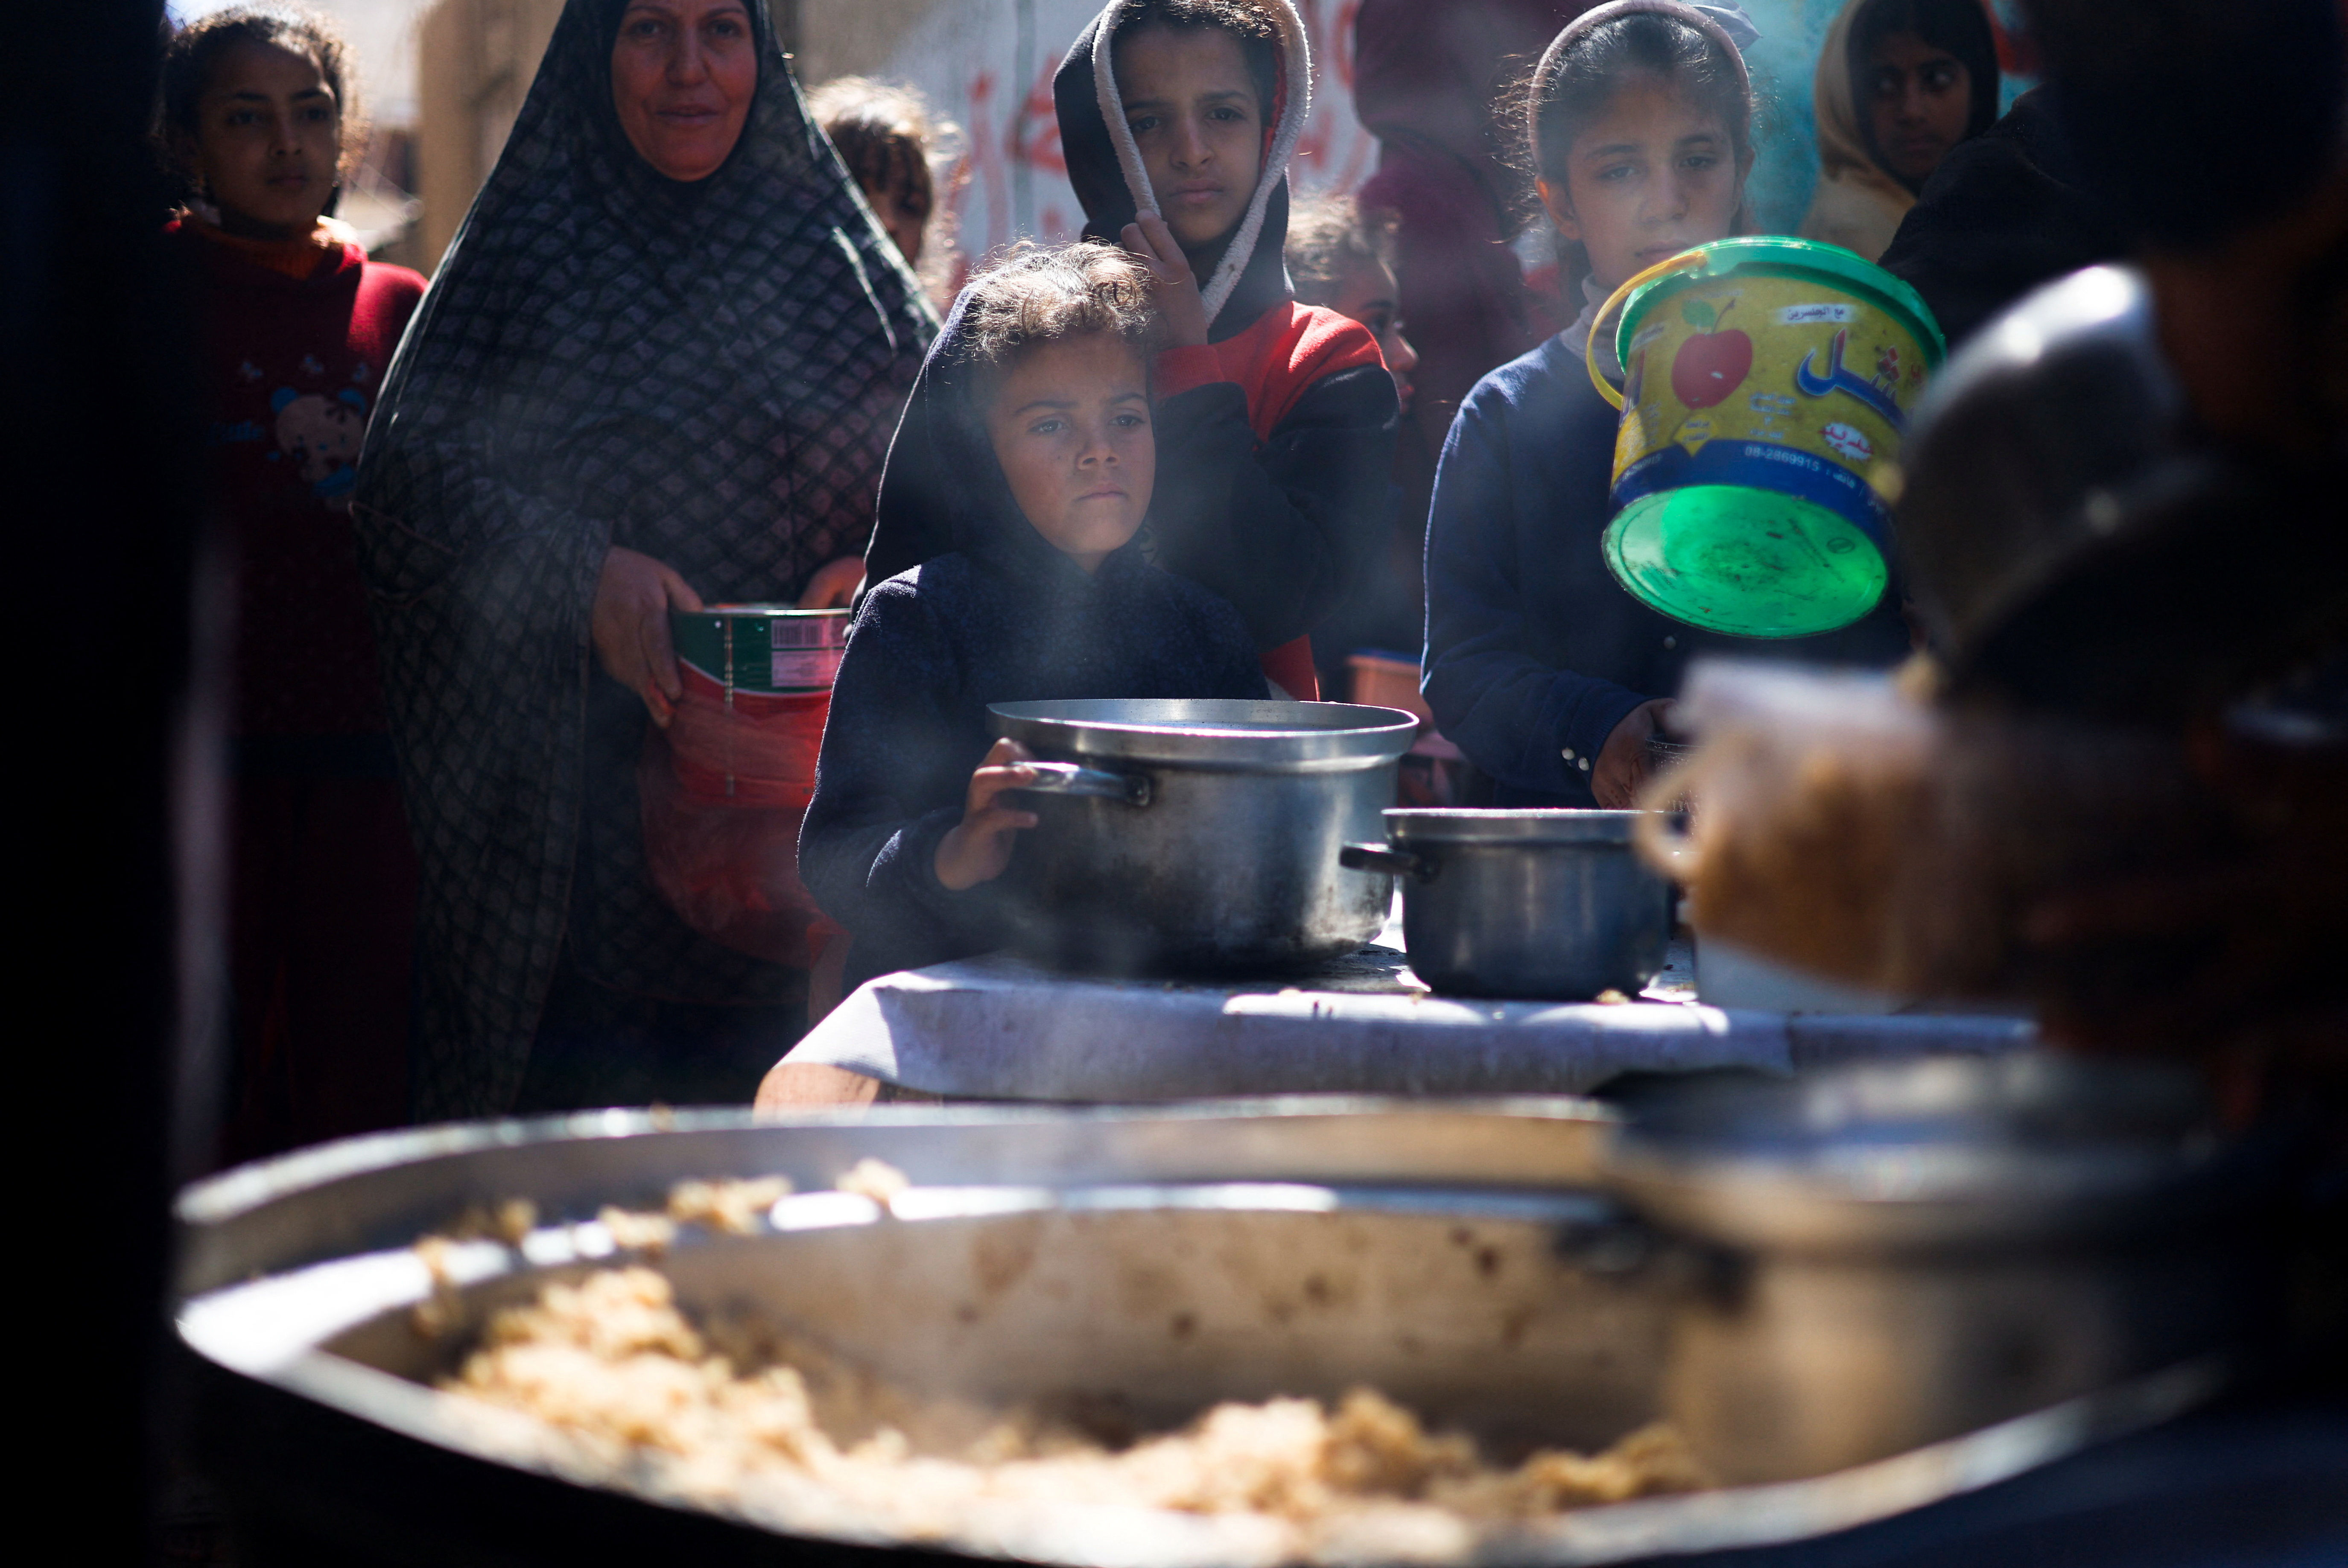 Palestinian children wait to receive food cooked by a charity kitchen amid shortages of food supplies, in Rafah